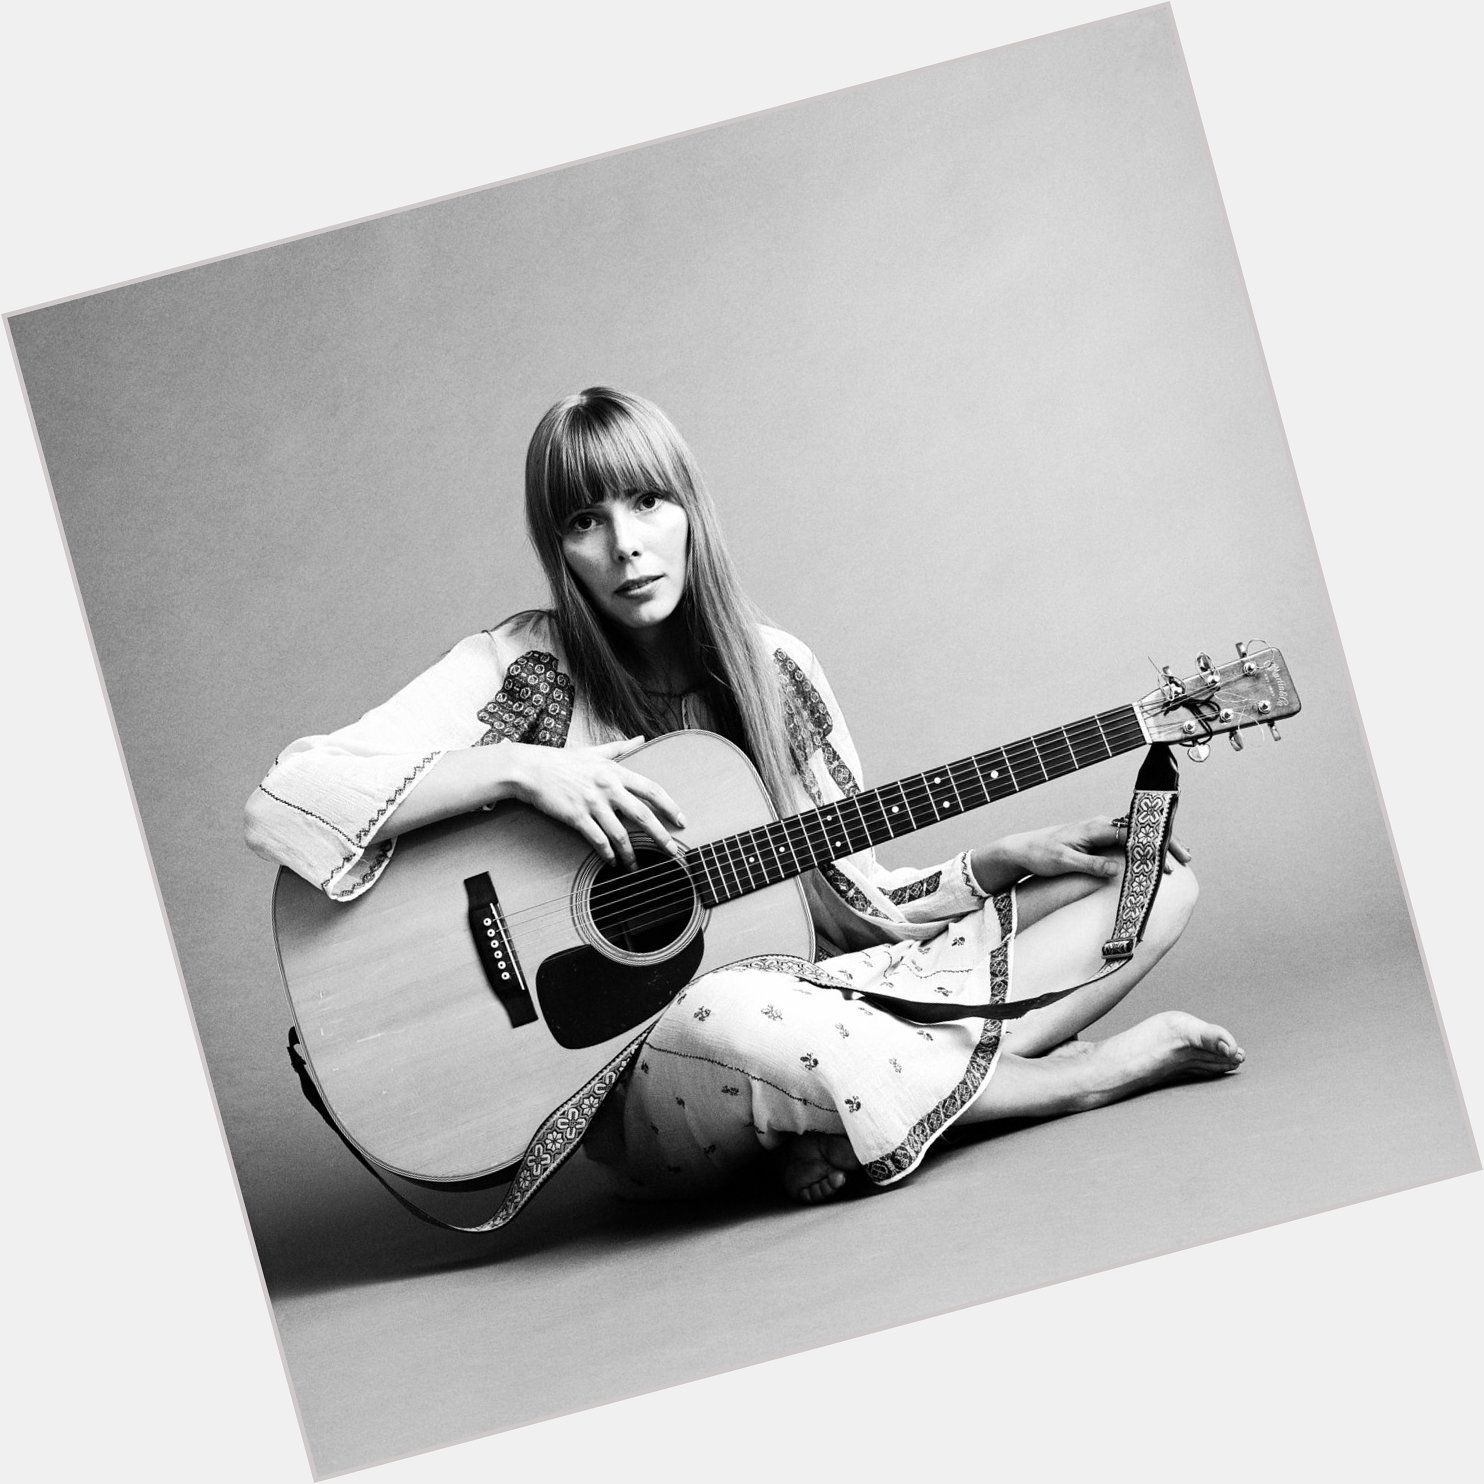 We are stardust
We are golden
And we\ve got to get ourselves
Back to the garden

Happy Birthday Joni Mitchell! 